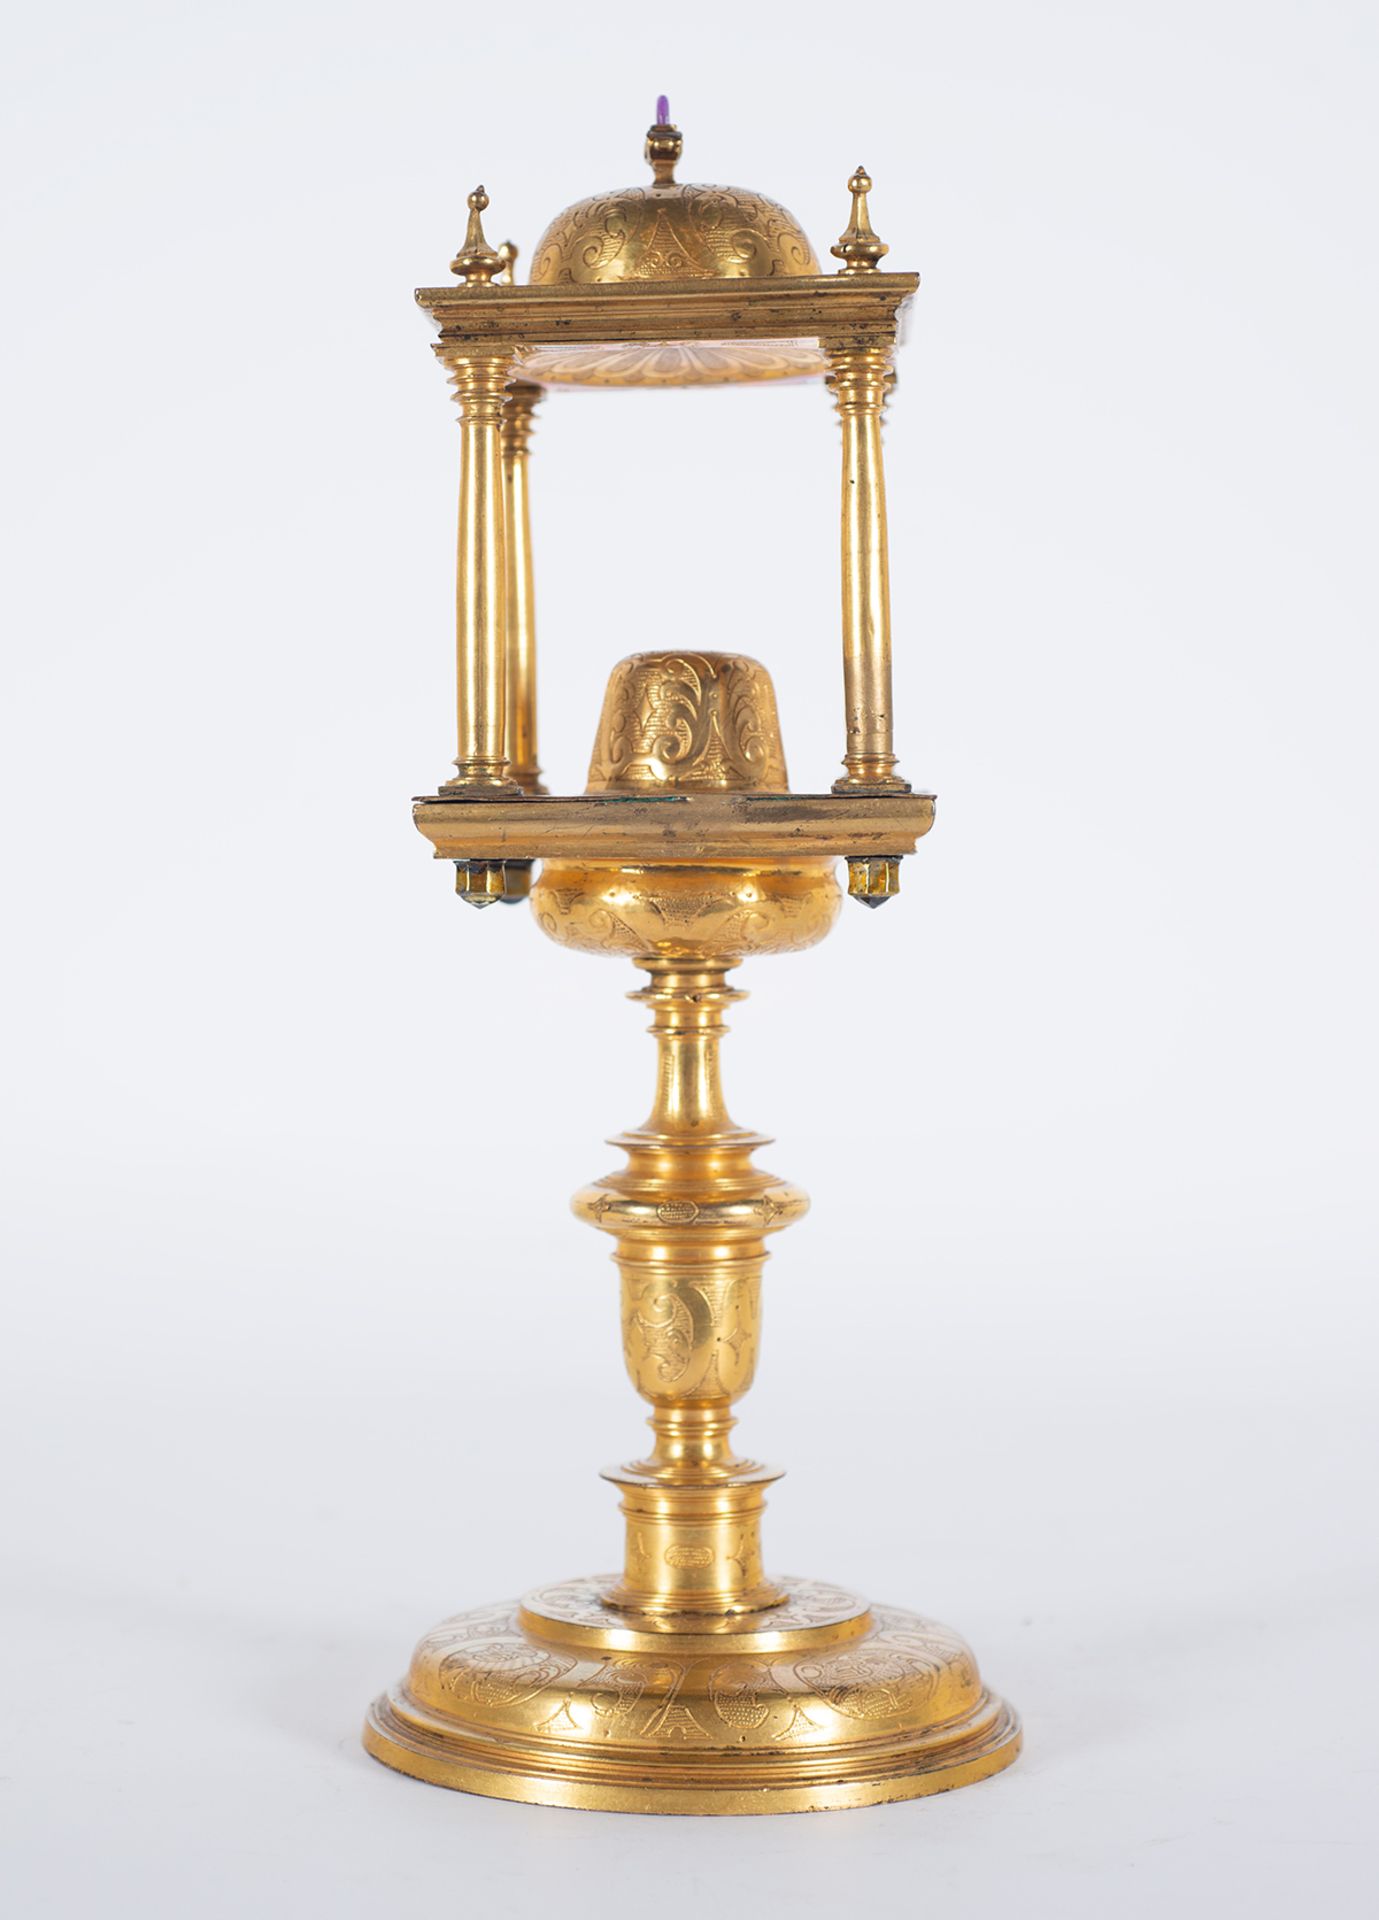 Important monstrance in gilded bronze from the 16th century